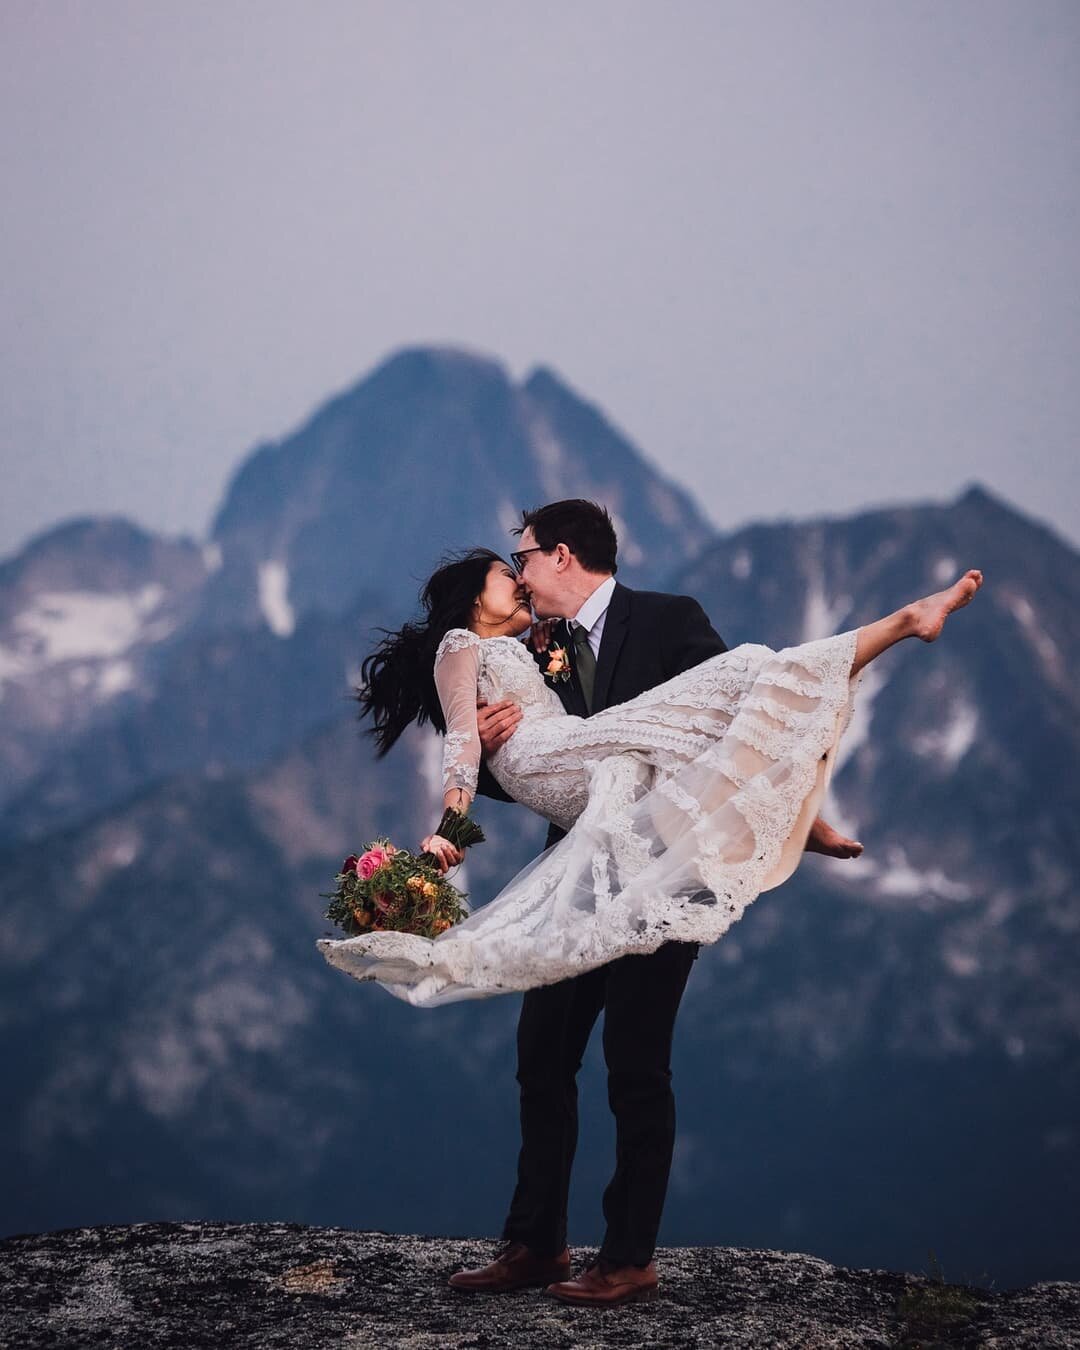 &quot;Boys will never understand the struggle of long hair and lipgloss on a windy day.&quot;

100% worth it for sure 🔥

There are many ways to get married. My two bits, this was fantastic!
4x4ing in a side by side to the top of a mountain, above th